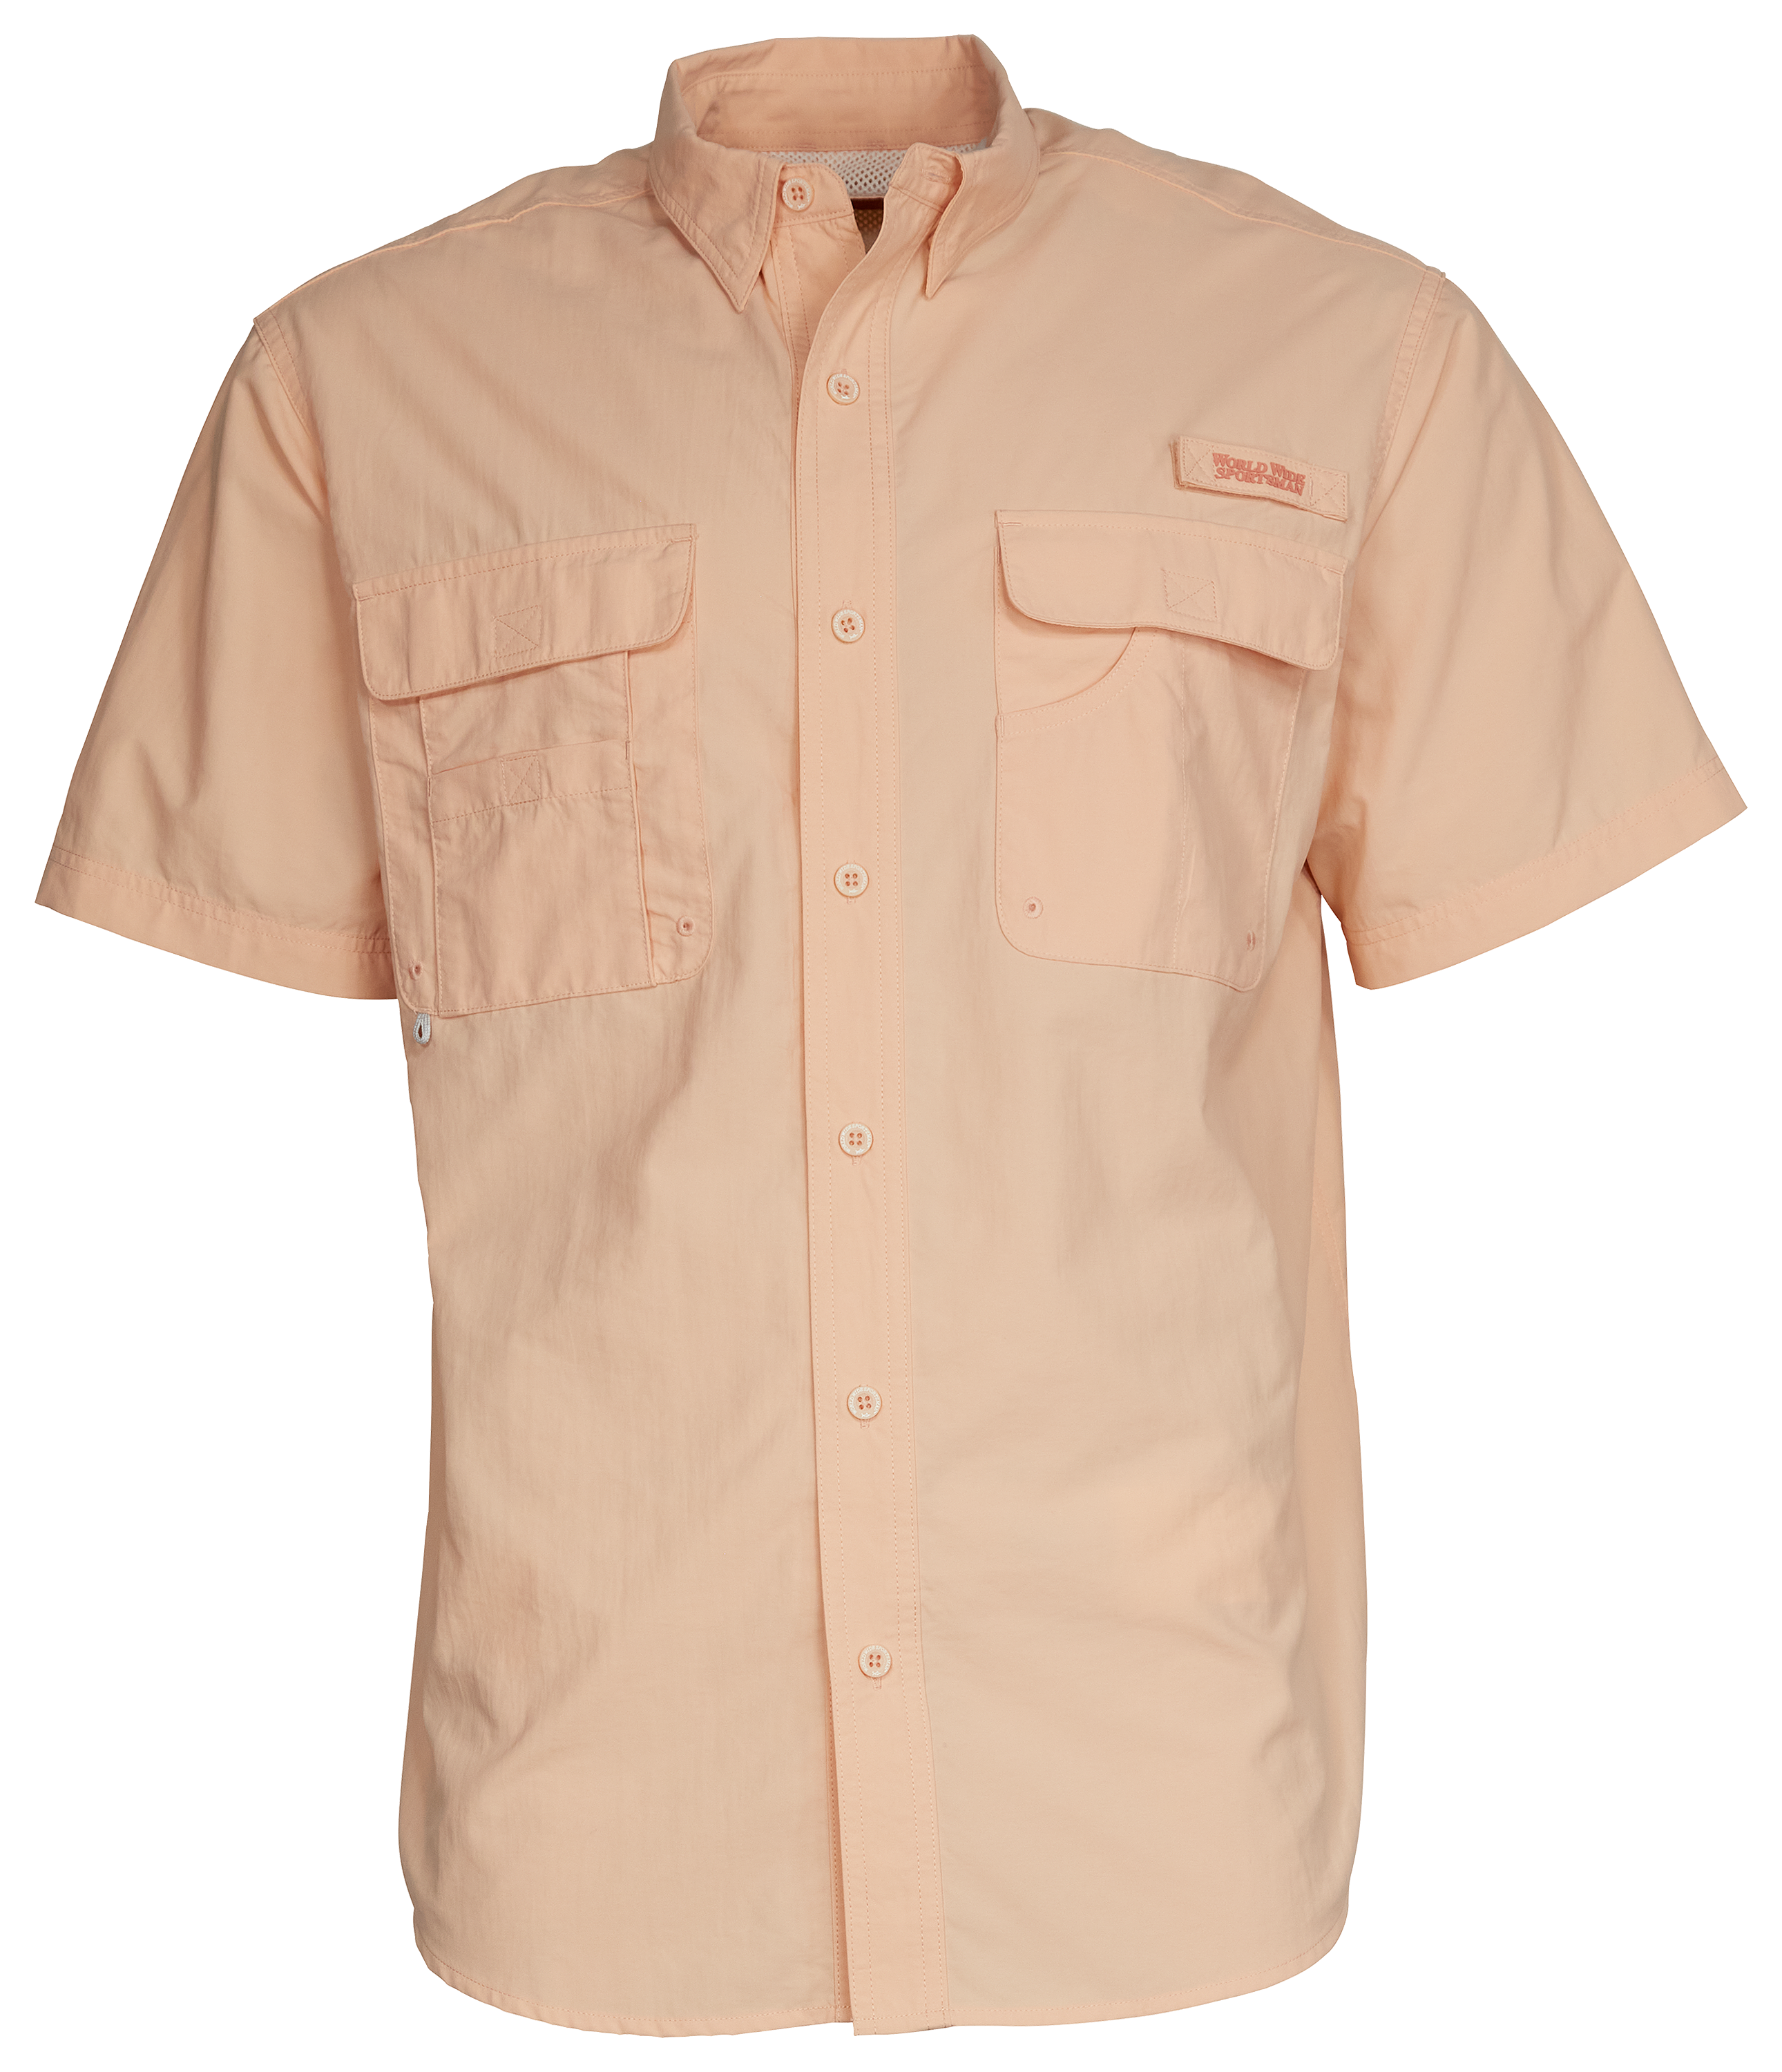 World Wide Sportsman Recycled-Nylon Angler 2.0 Short-Sleeve Button-Down Shirt for Men - Almost Apricot - L